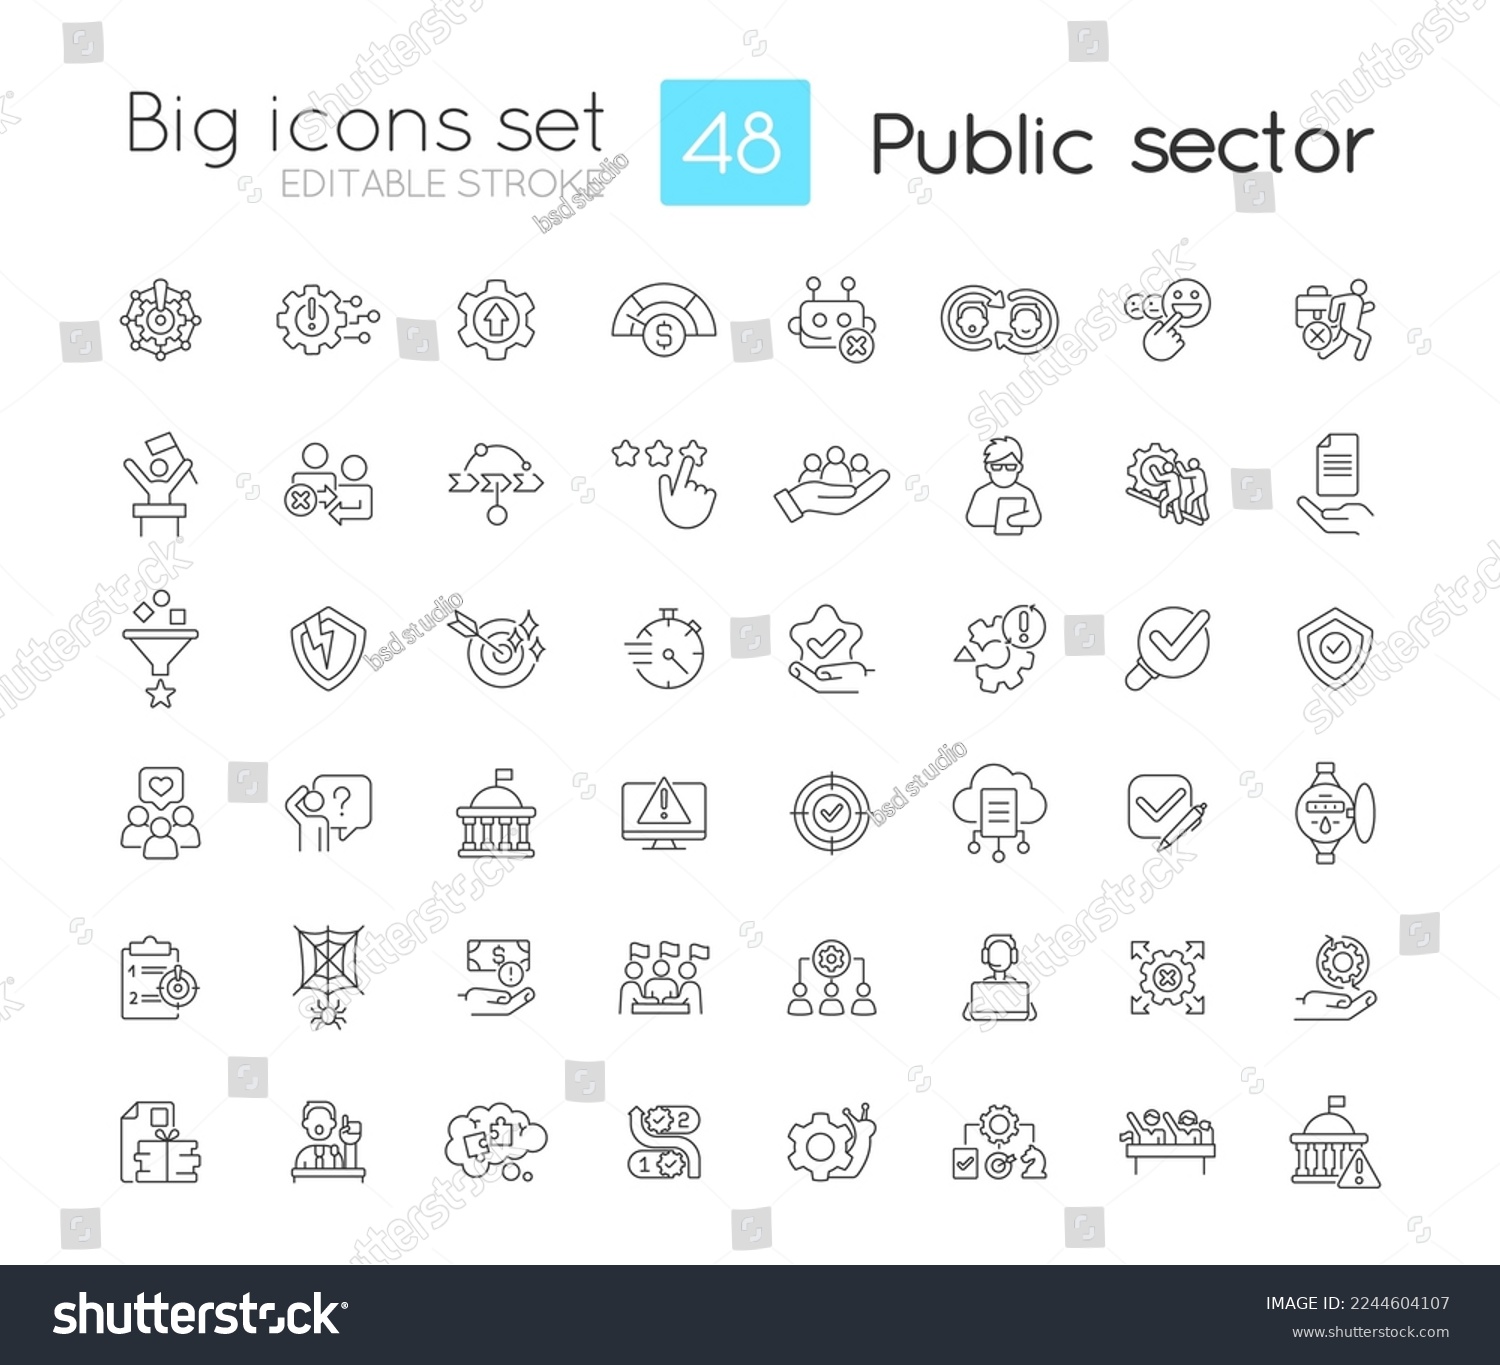 Public sector linear icons set. Services and enterprises. Government digital transformation. Administration. Customizable thin line symbols. Isolated vector outline illustrations. Editable stroke #2244604107